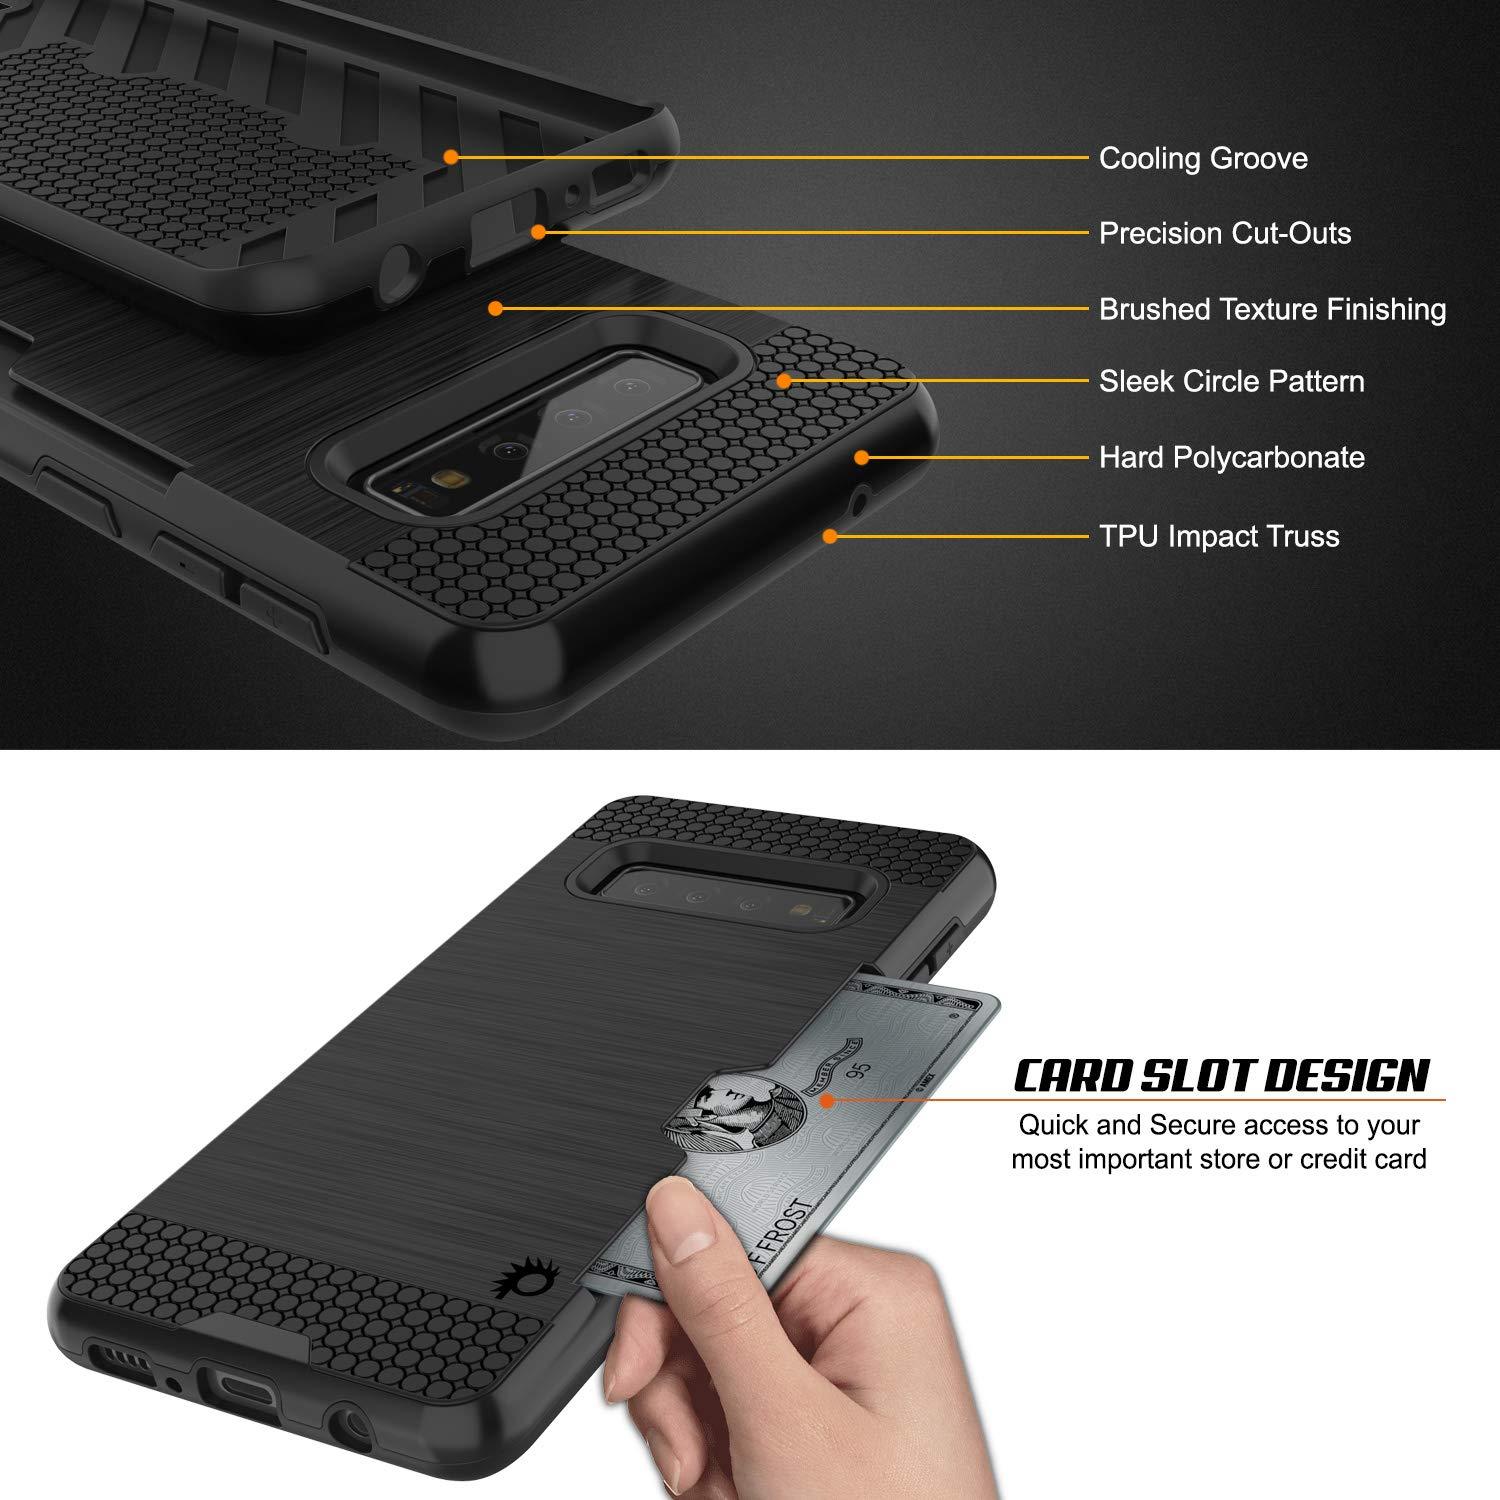 Galaxy S10 Case, PUNKcase [SLOT Series] [Slim Fit] Dual-Layer Armor Cover w/Integrated Anti-Shock System, Credit Card Slot [Black]